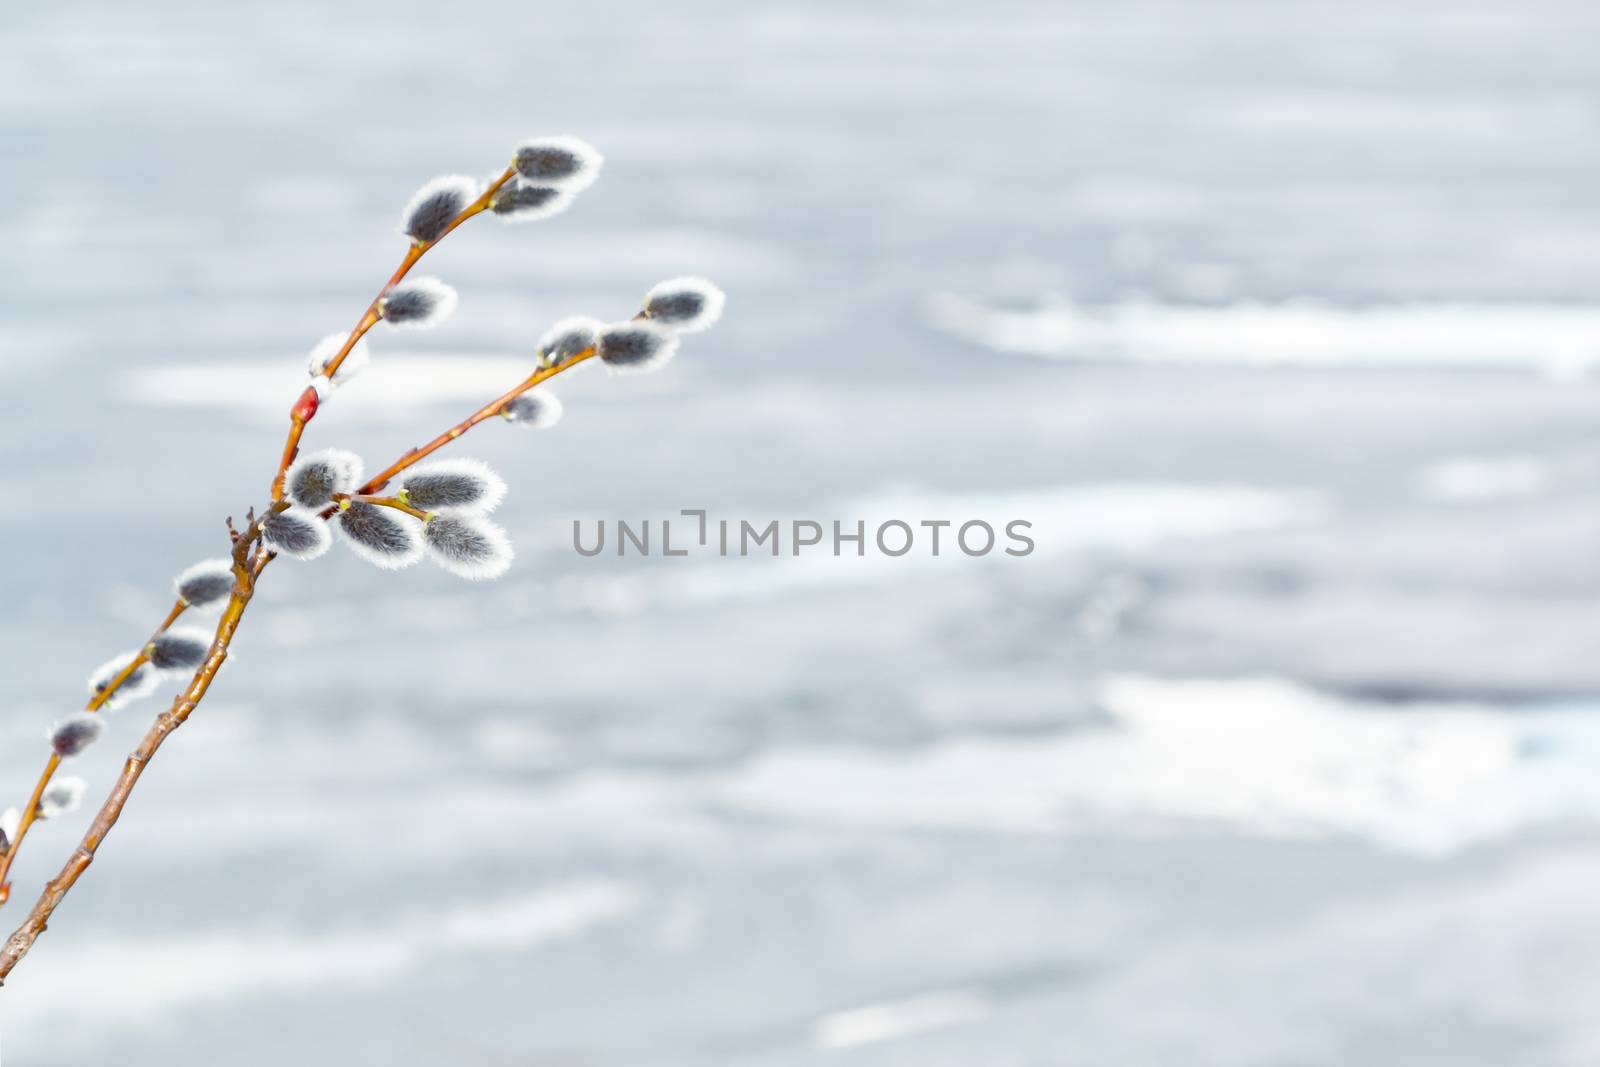 Willow twig on the background of melting ice on the lake in early spring - spring background and season change concept, place for text, copy space.